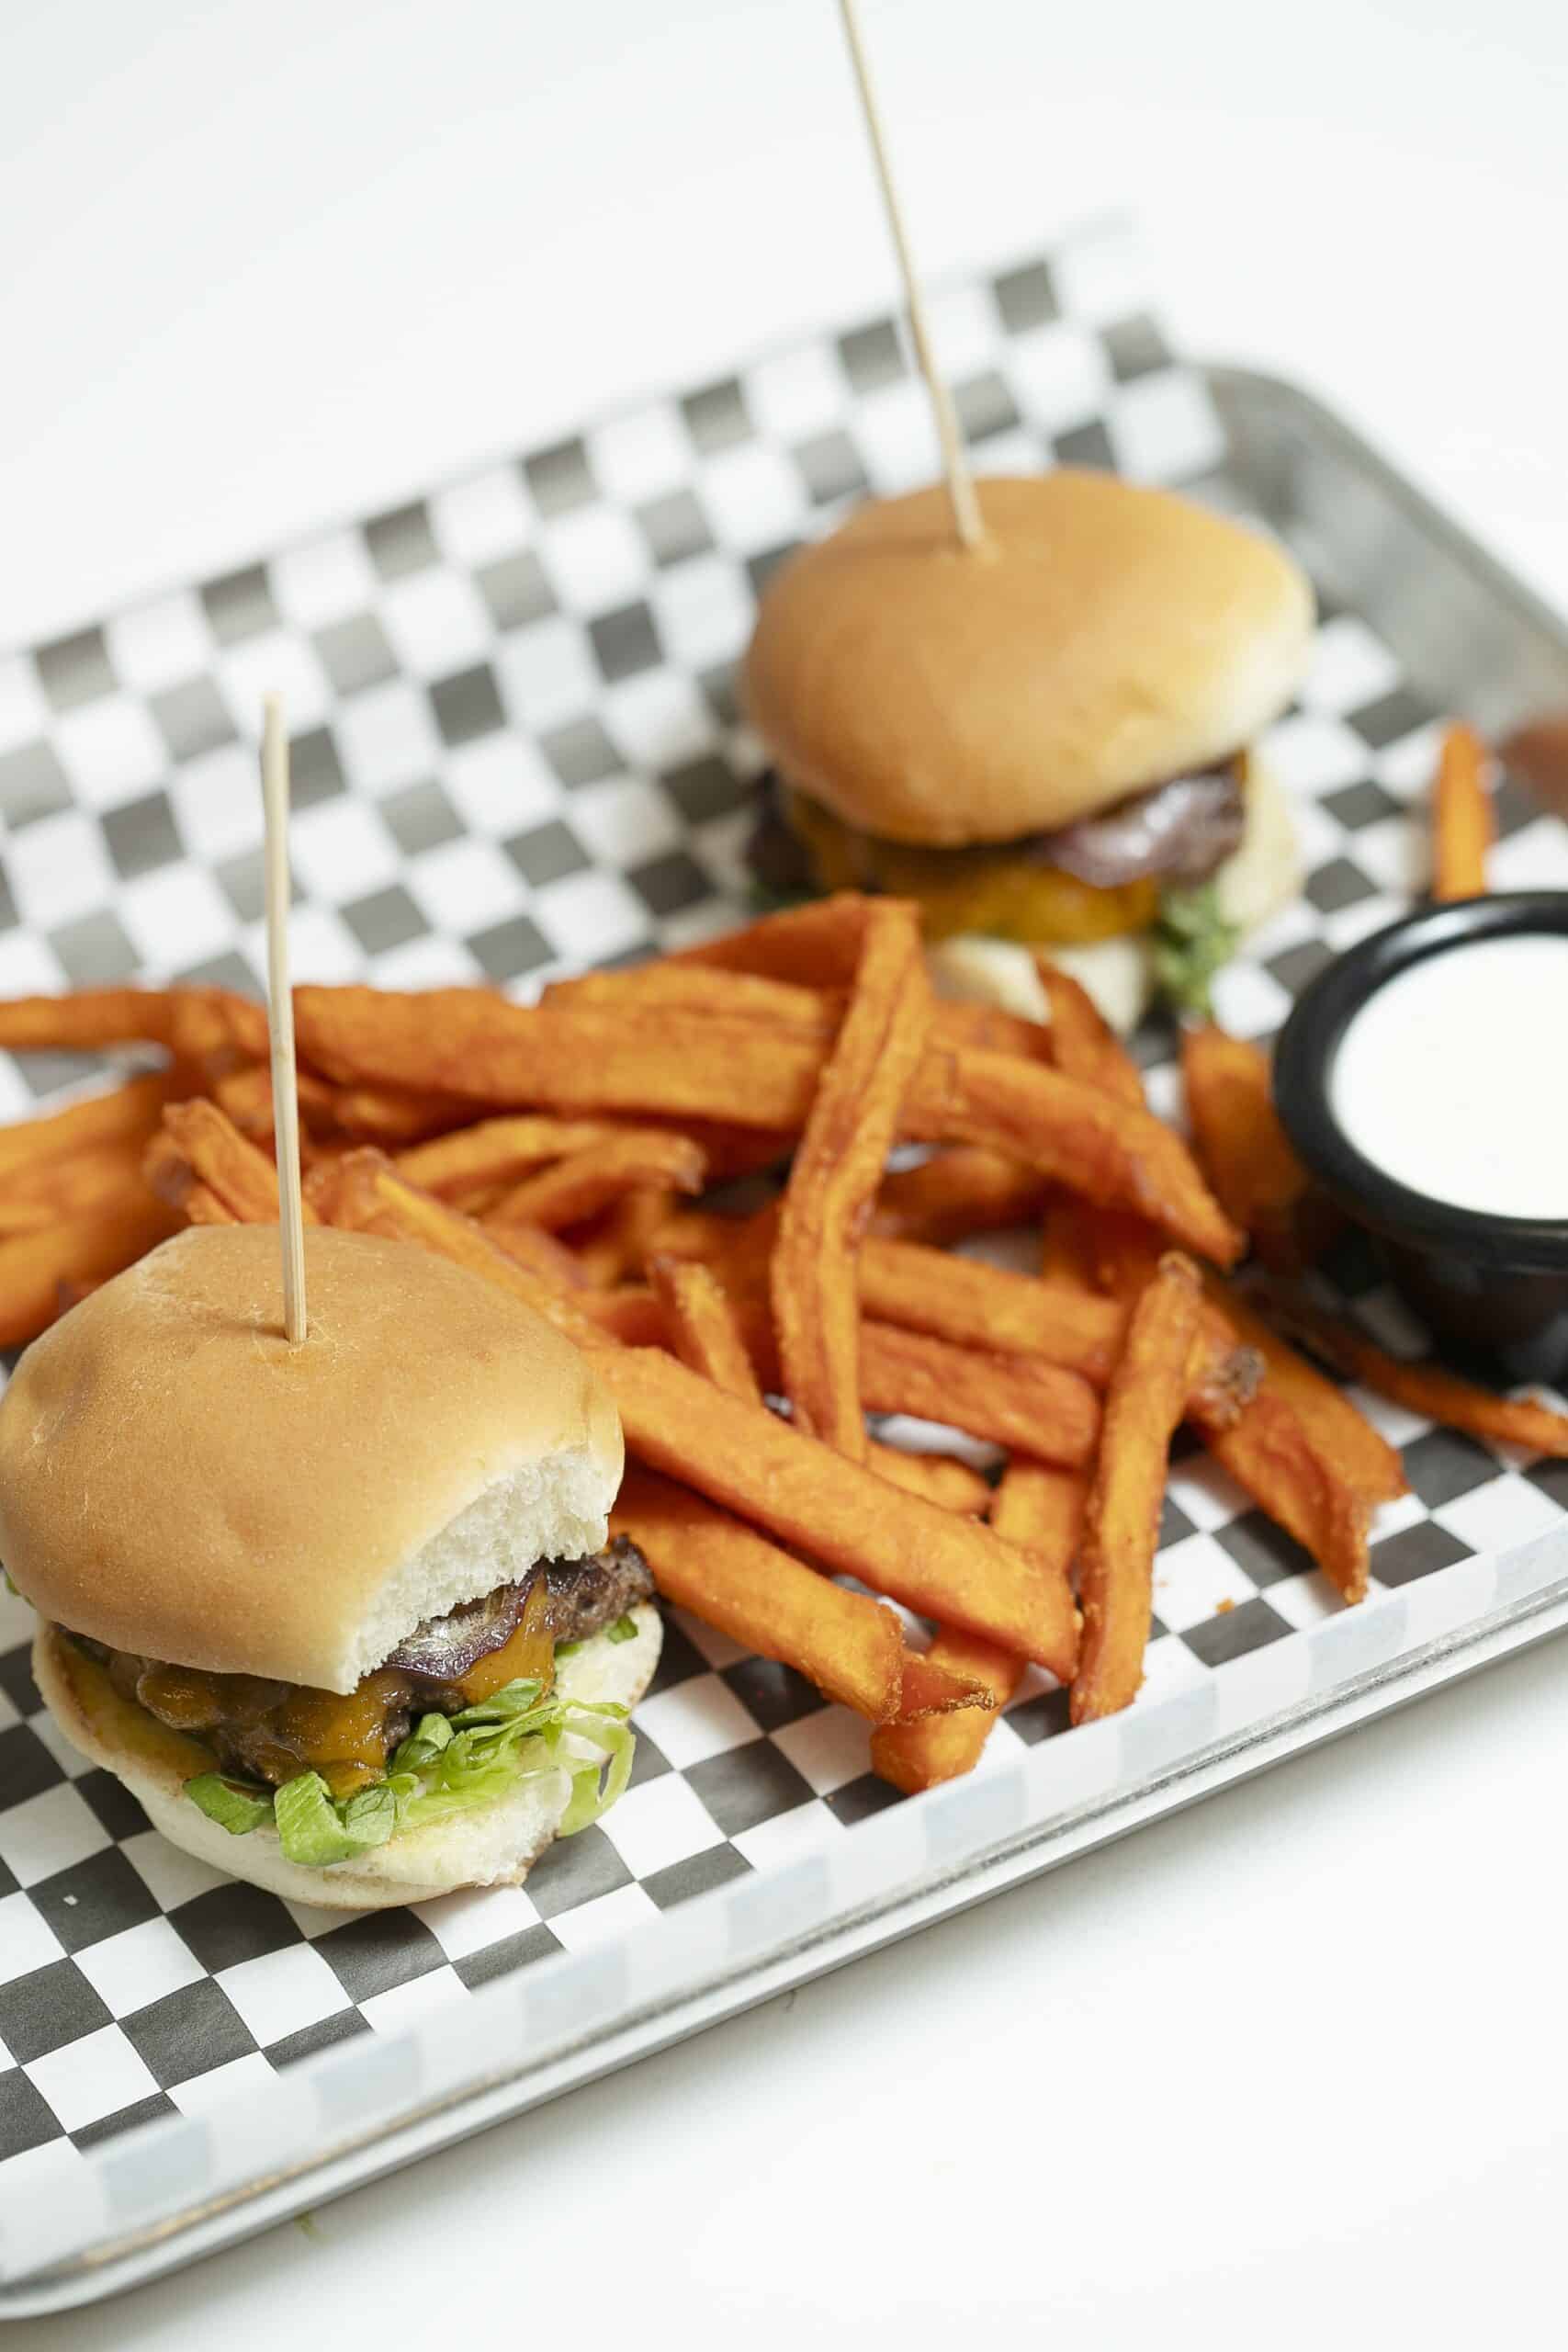 Sliders from 24 Taps with french fries on the side